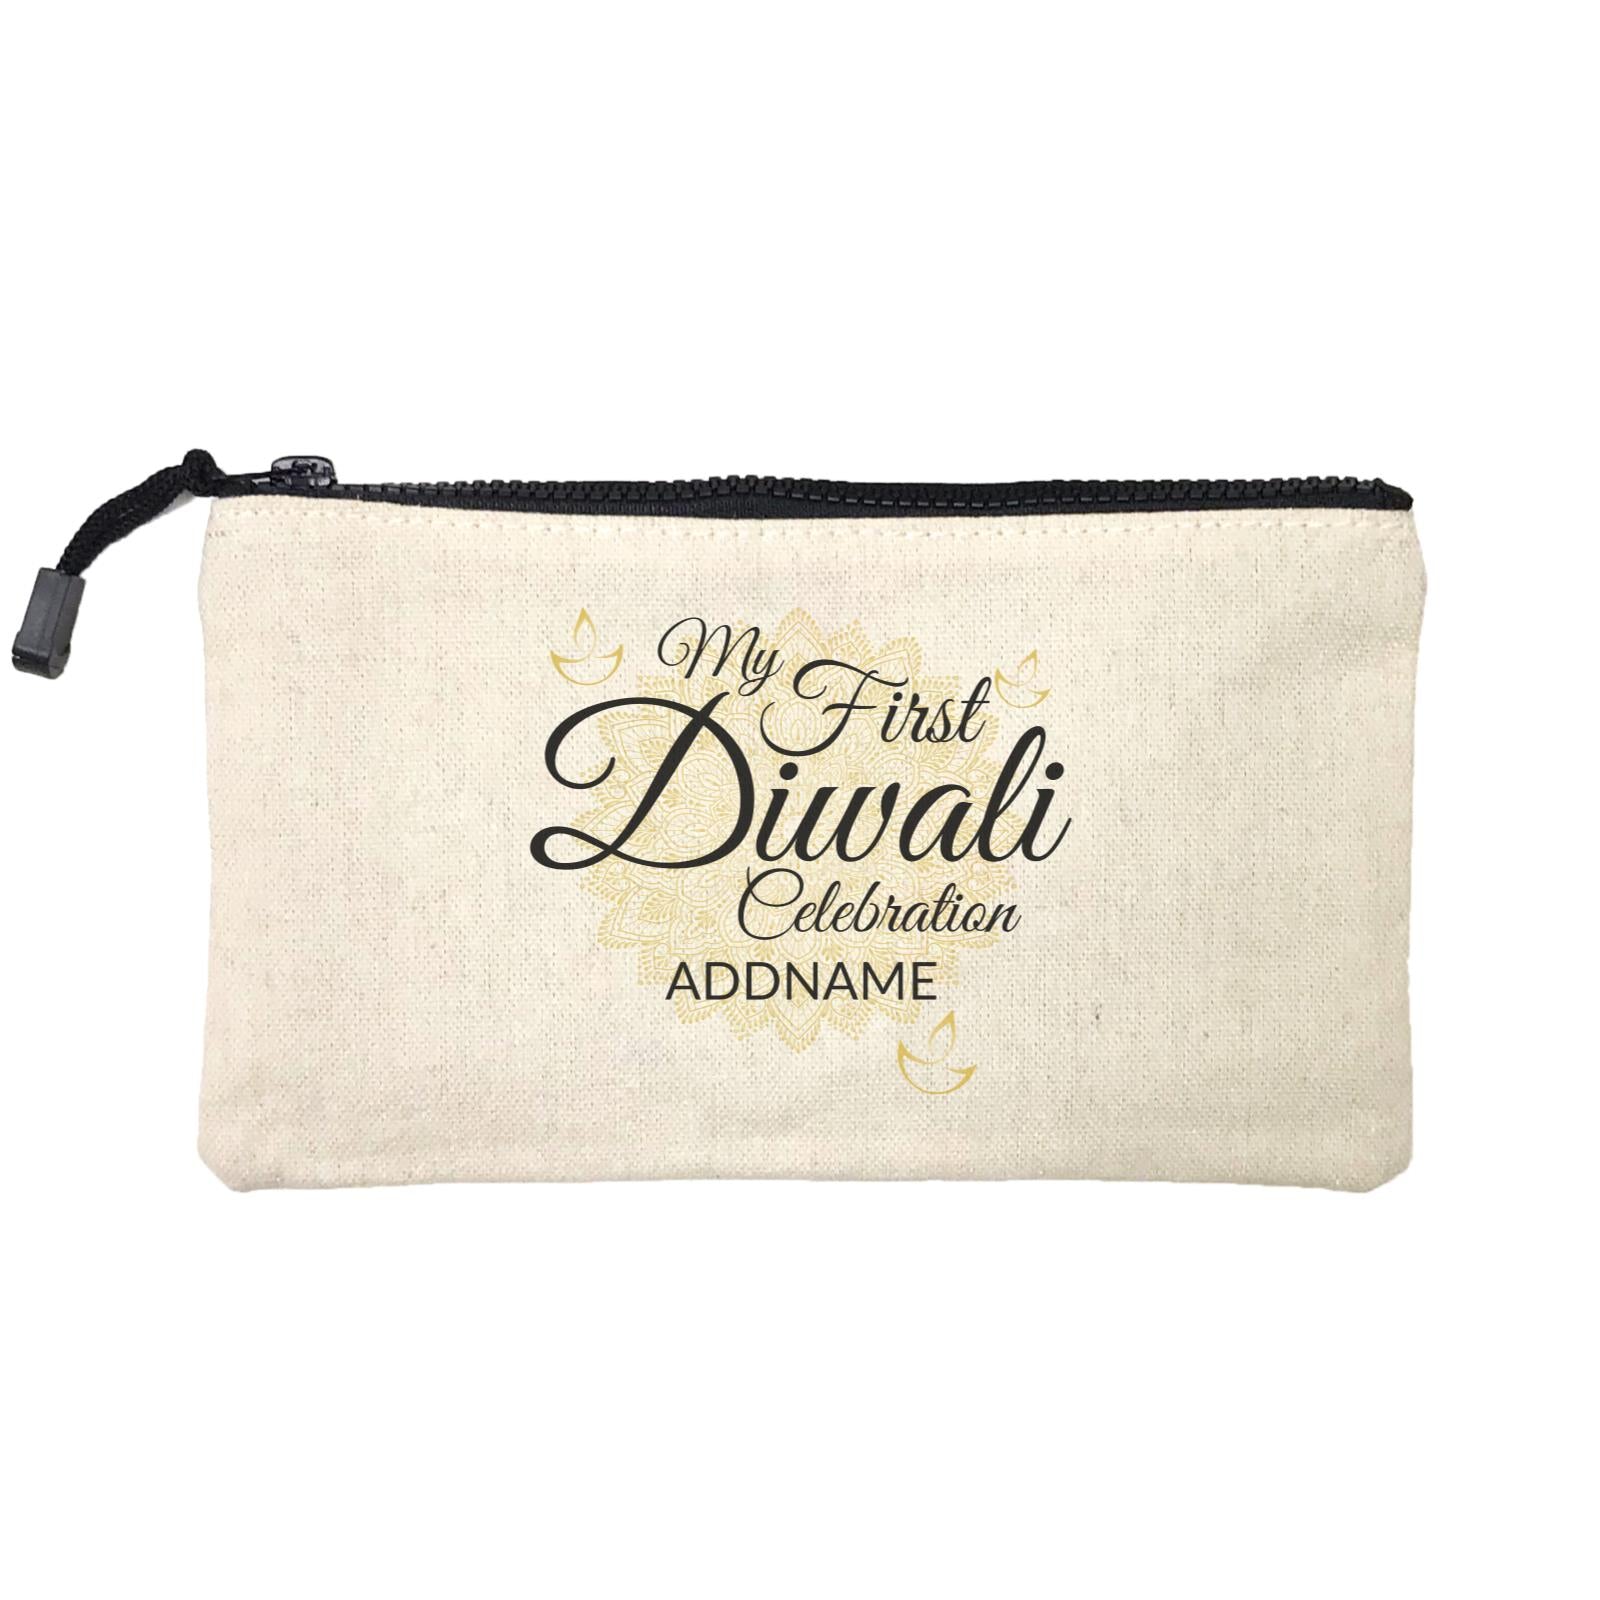 My First Diwali Celebration with Mandala Addname Mini Accessories Stationery Pouch